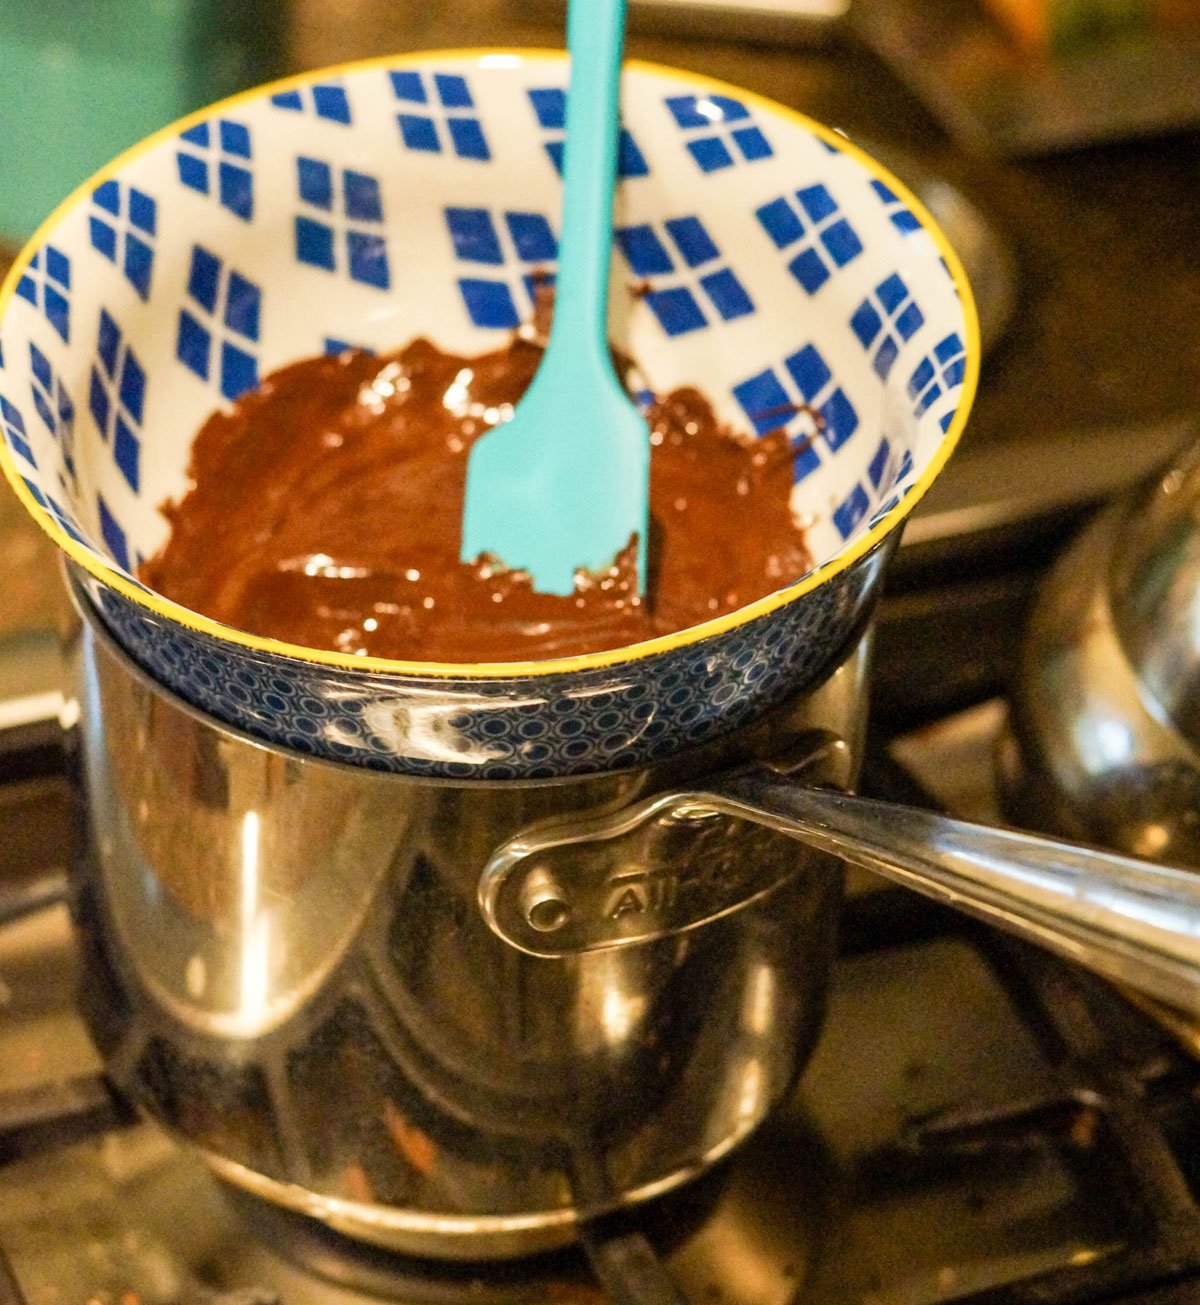 melting chocolate on the stove with a double boiler